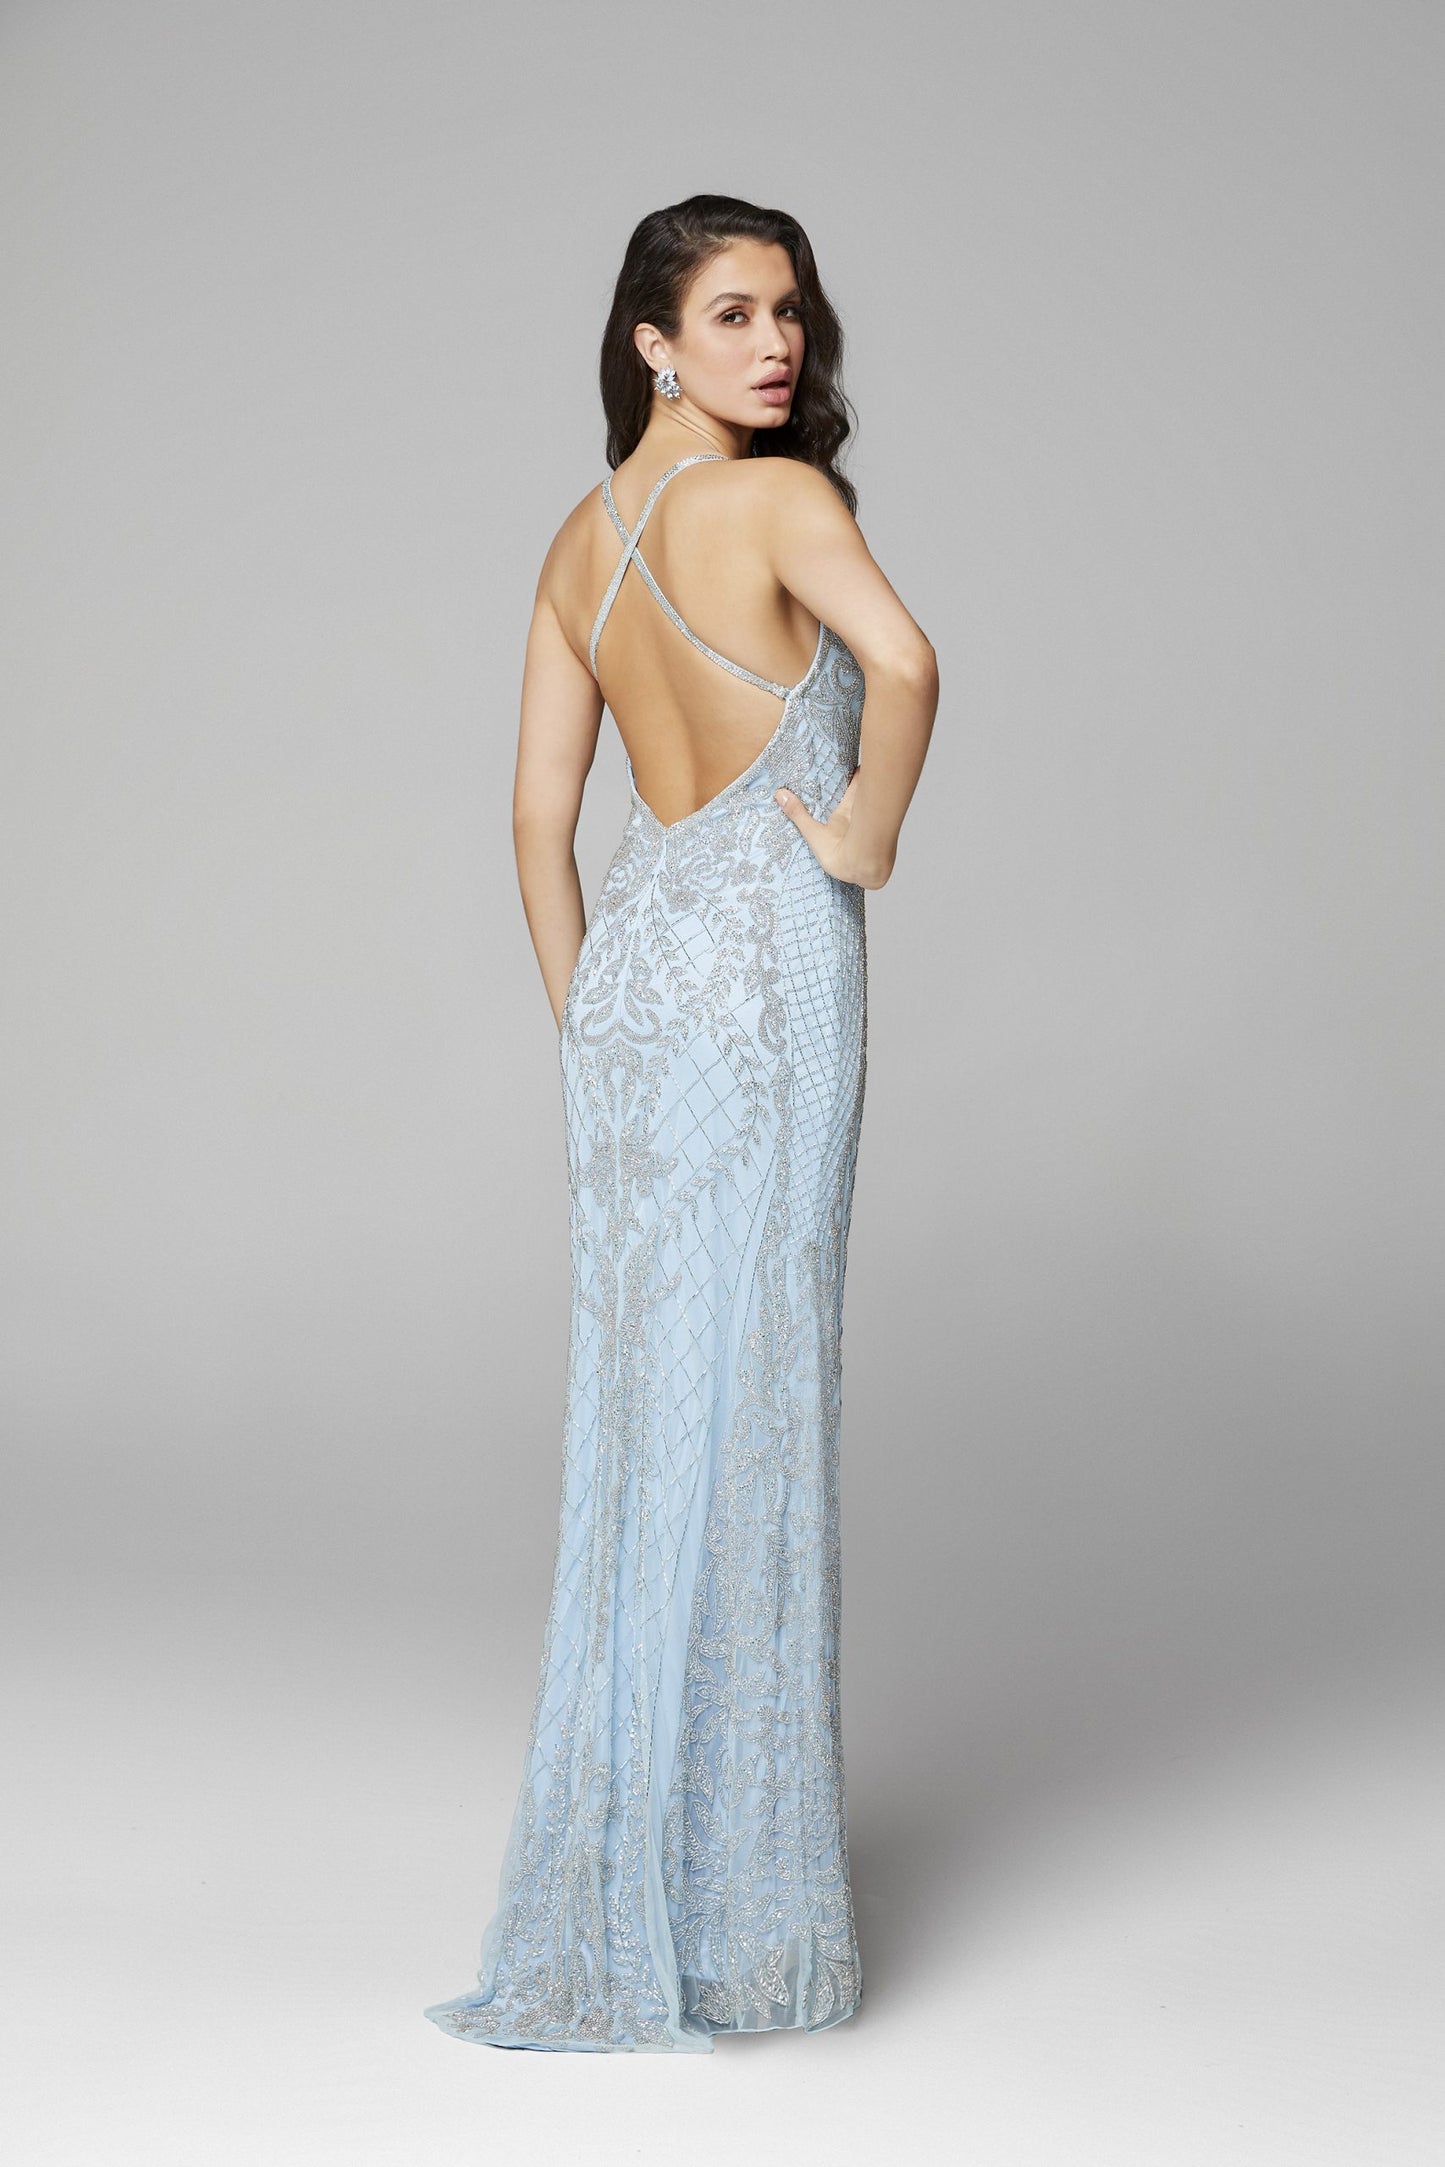 Primavera Couture 3428 is a beaded sequins Prom Dress, Pageant Gown, & Formal Evening Wear gown. This long Gown Features a v neckline with spaghetti straps that criss cross in the open back   Color Powder Blue  Size 8